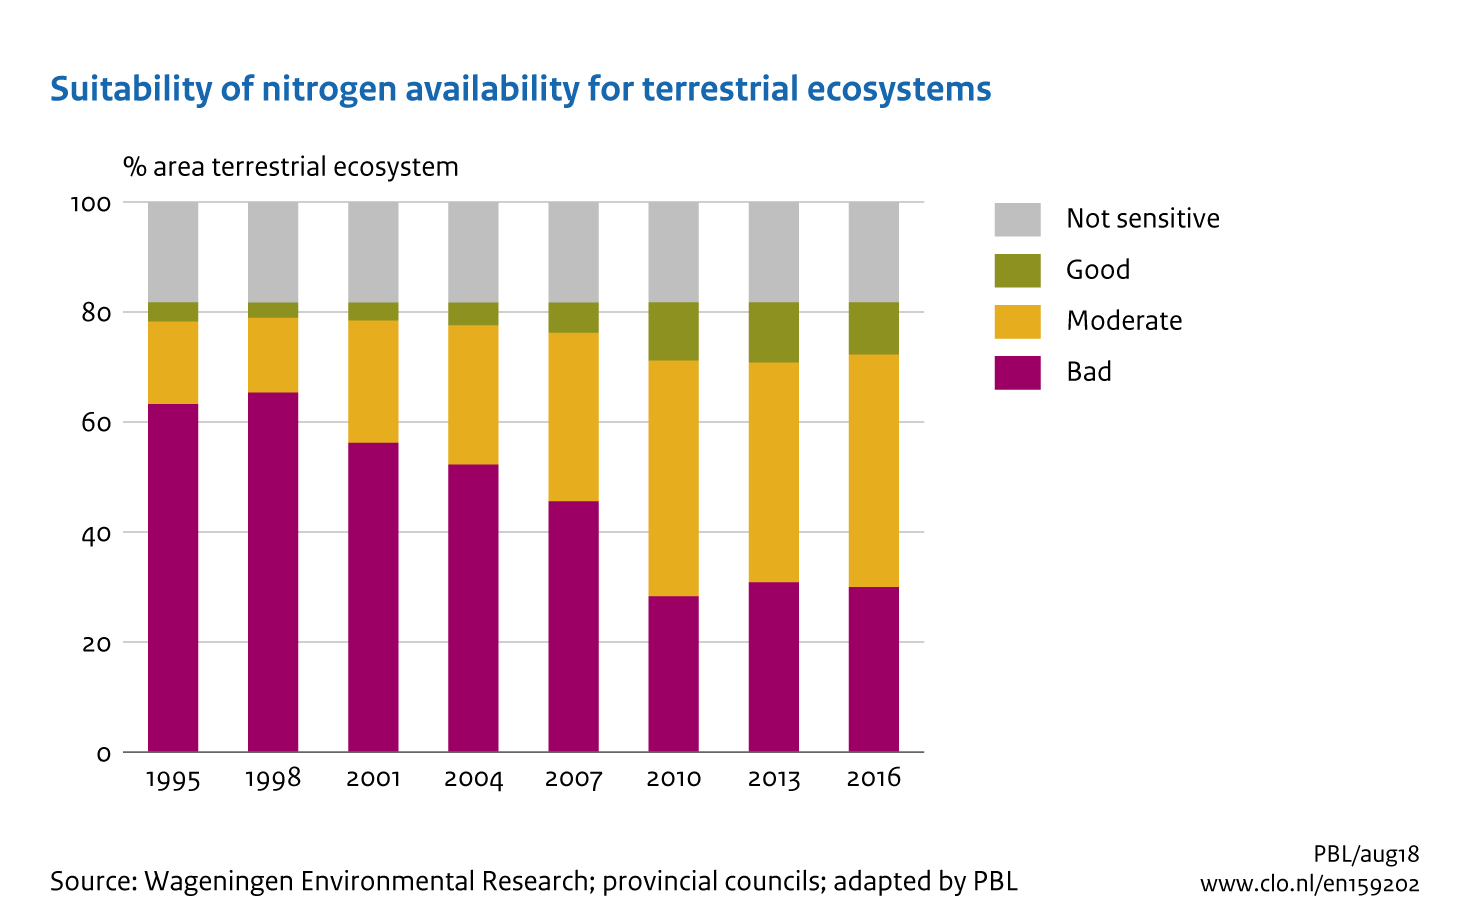 Image Suitability of nitrogen availability for terrestrial ecosystems. The image is further explained in the text.